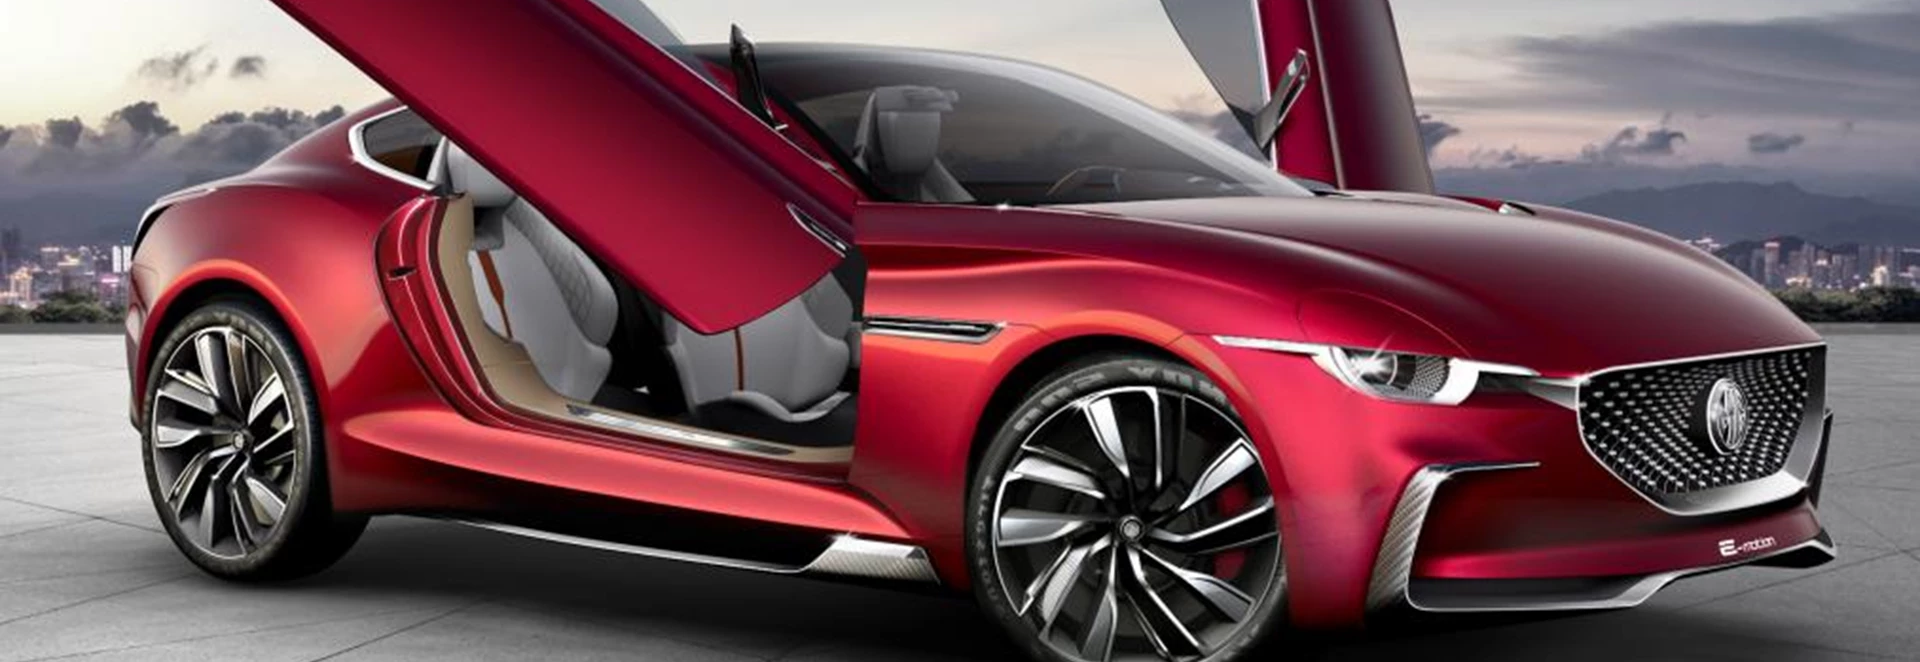 MG set to launch new electric sports car and hatchback 